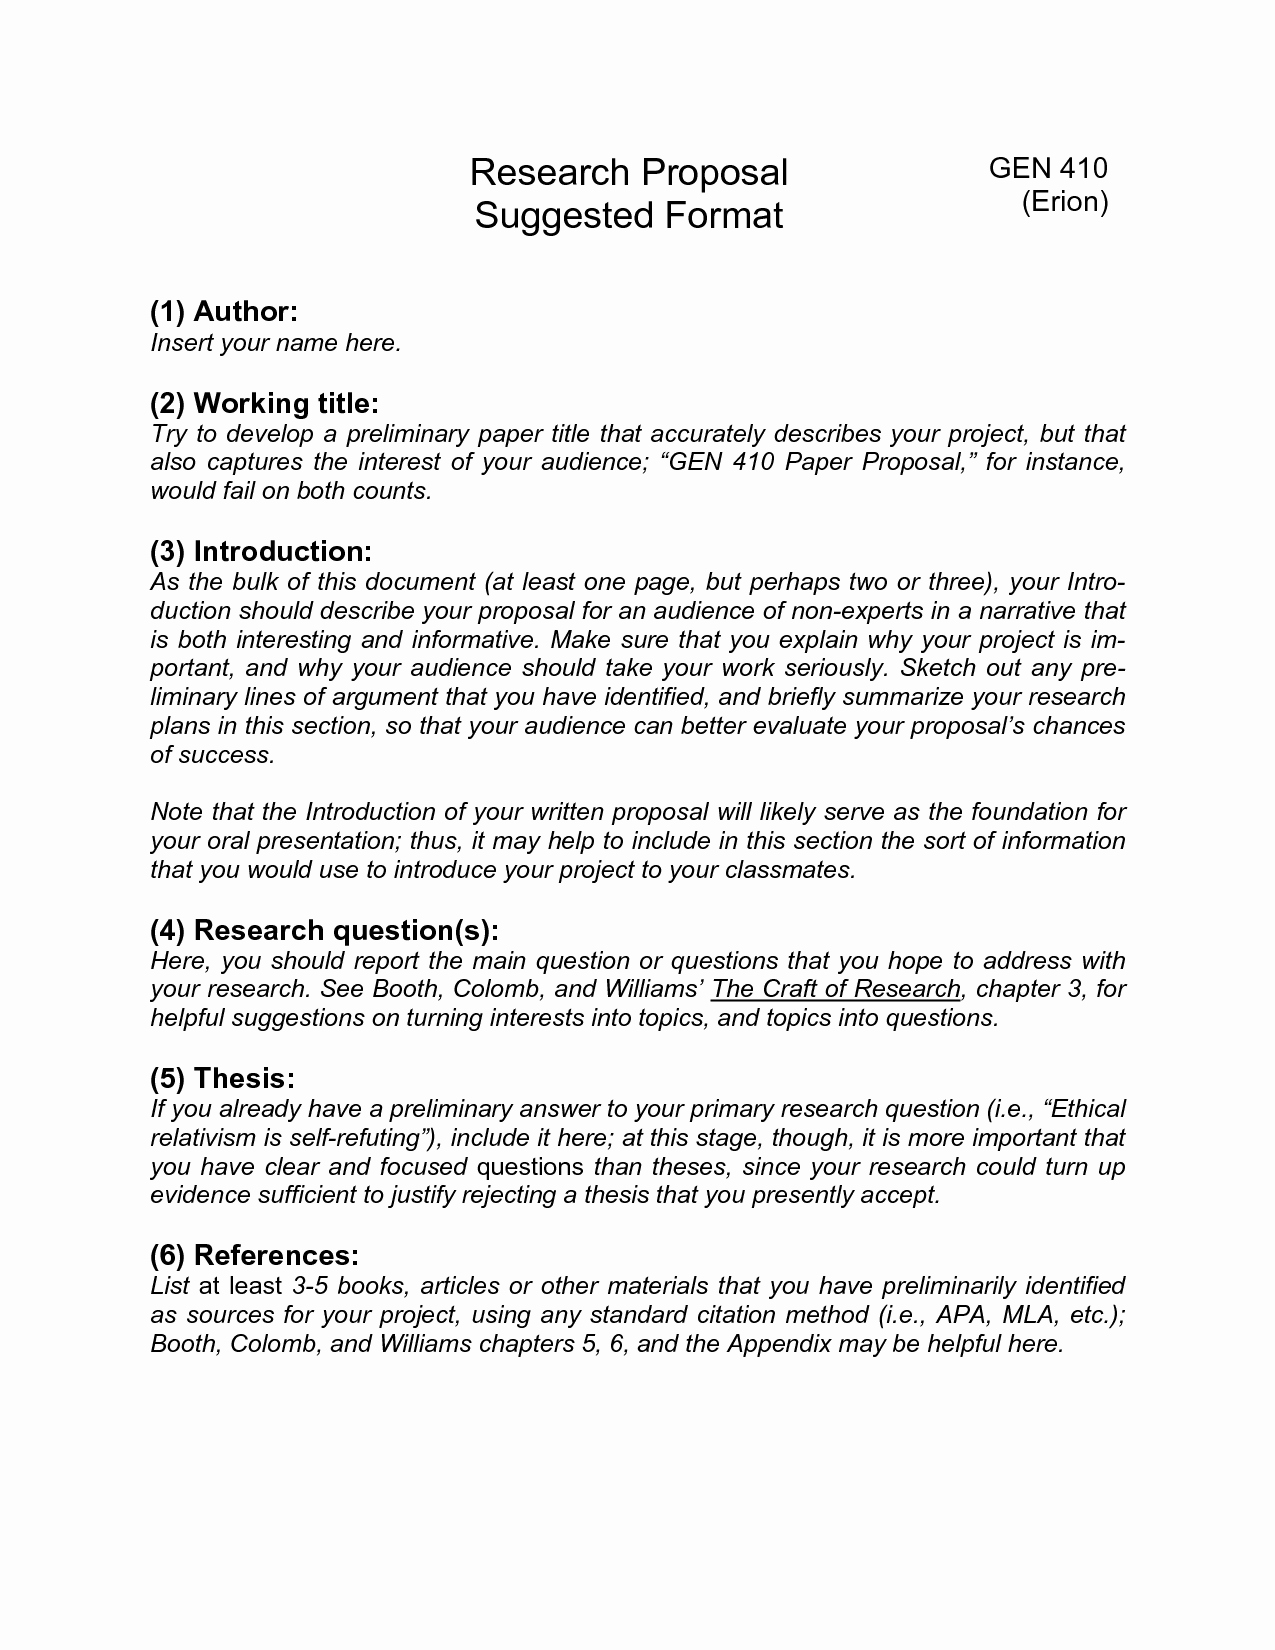 Research Proposal Outline Example Elegant What Constitutes A Quality Research Proposal How to